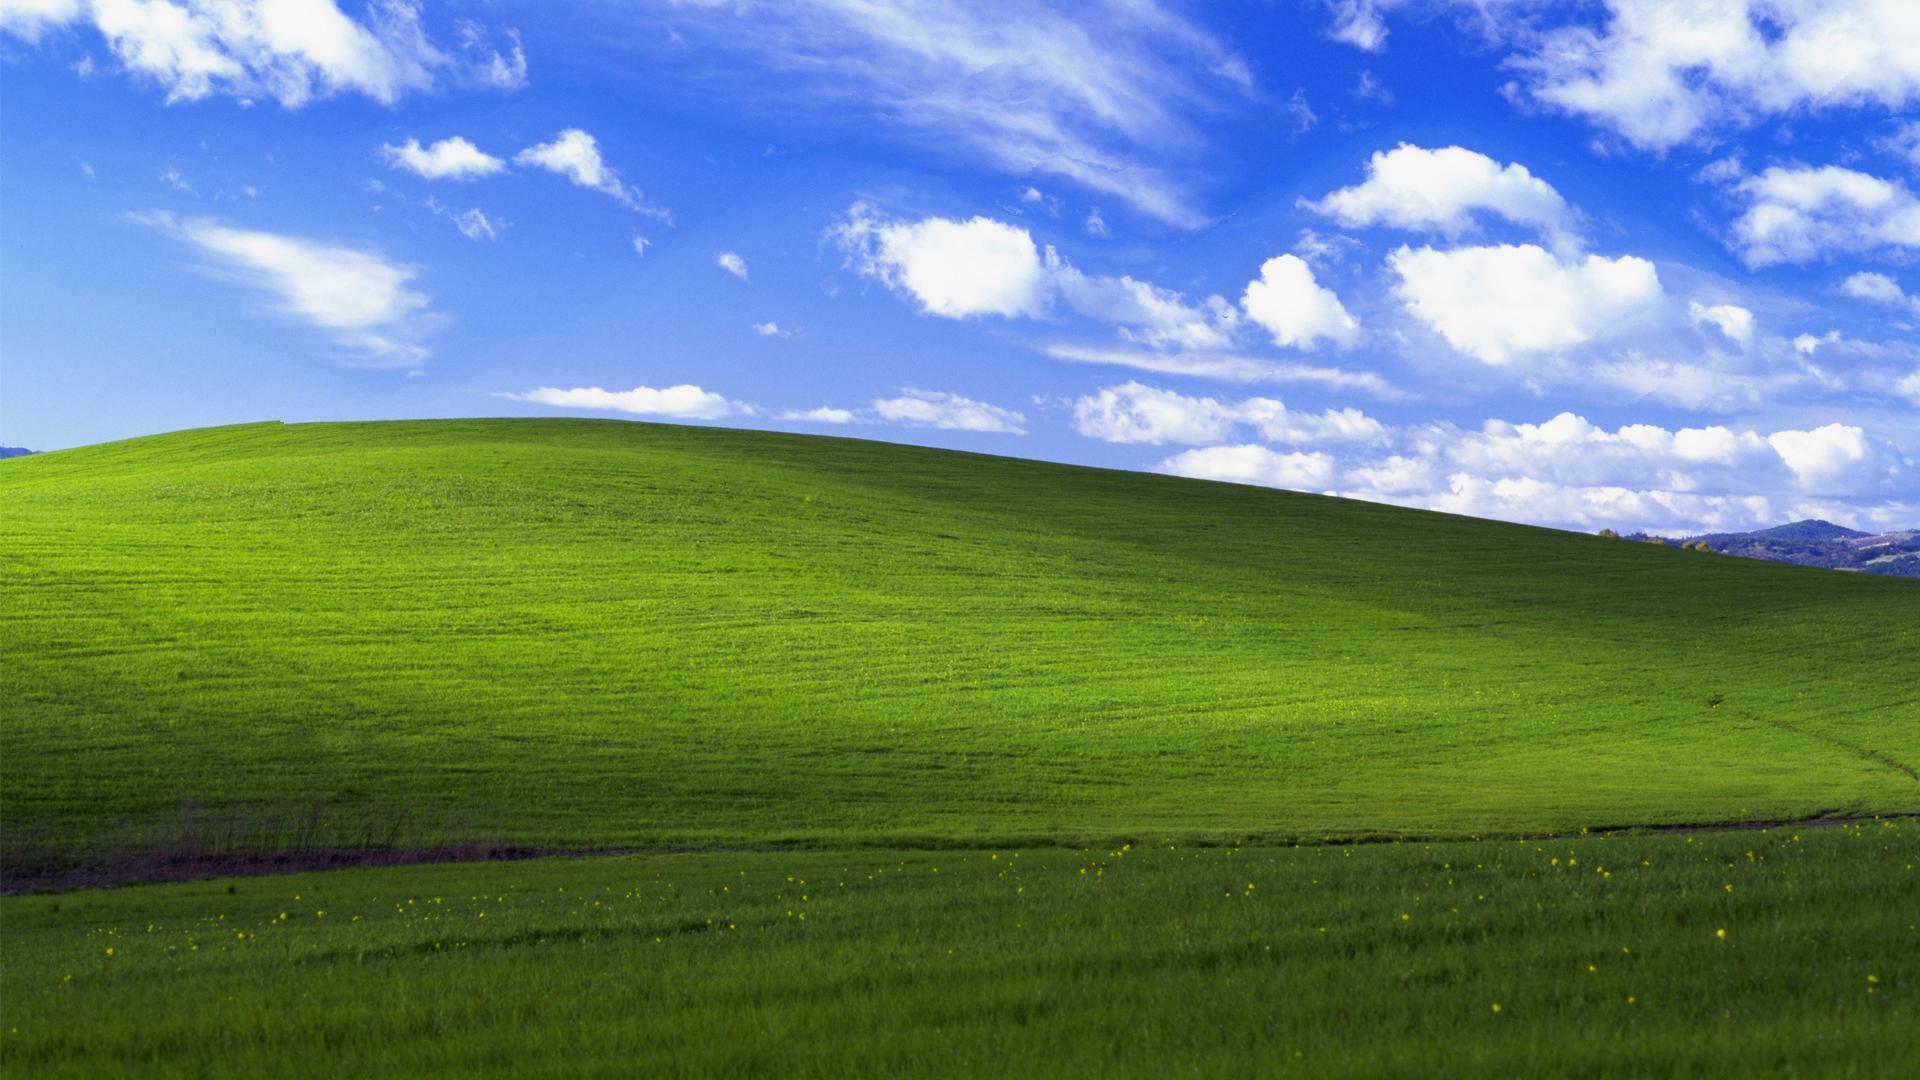 Windows XP Wallpapers - Top Free Windows XP Backgrounds ...